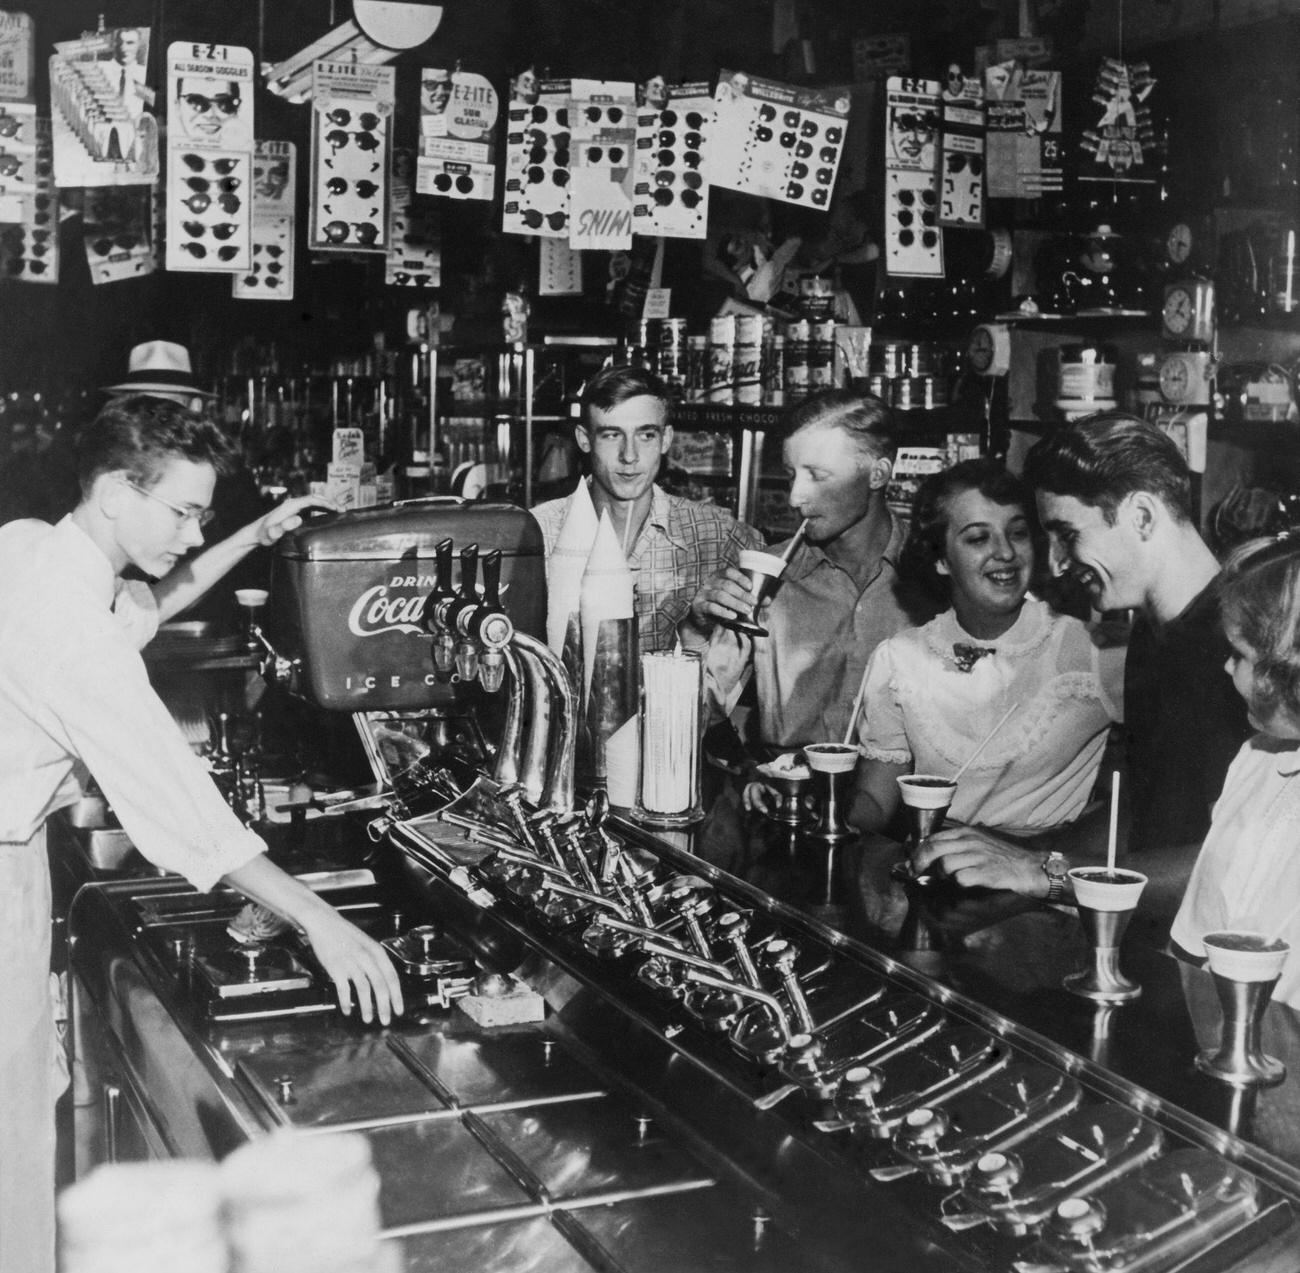 Interior of a bar in New York, United States, date unspecified.